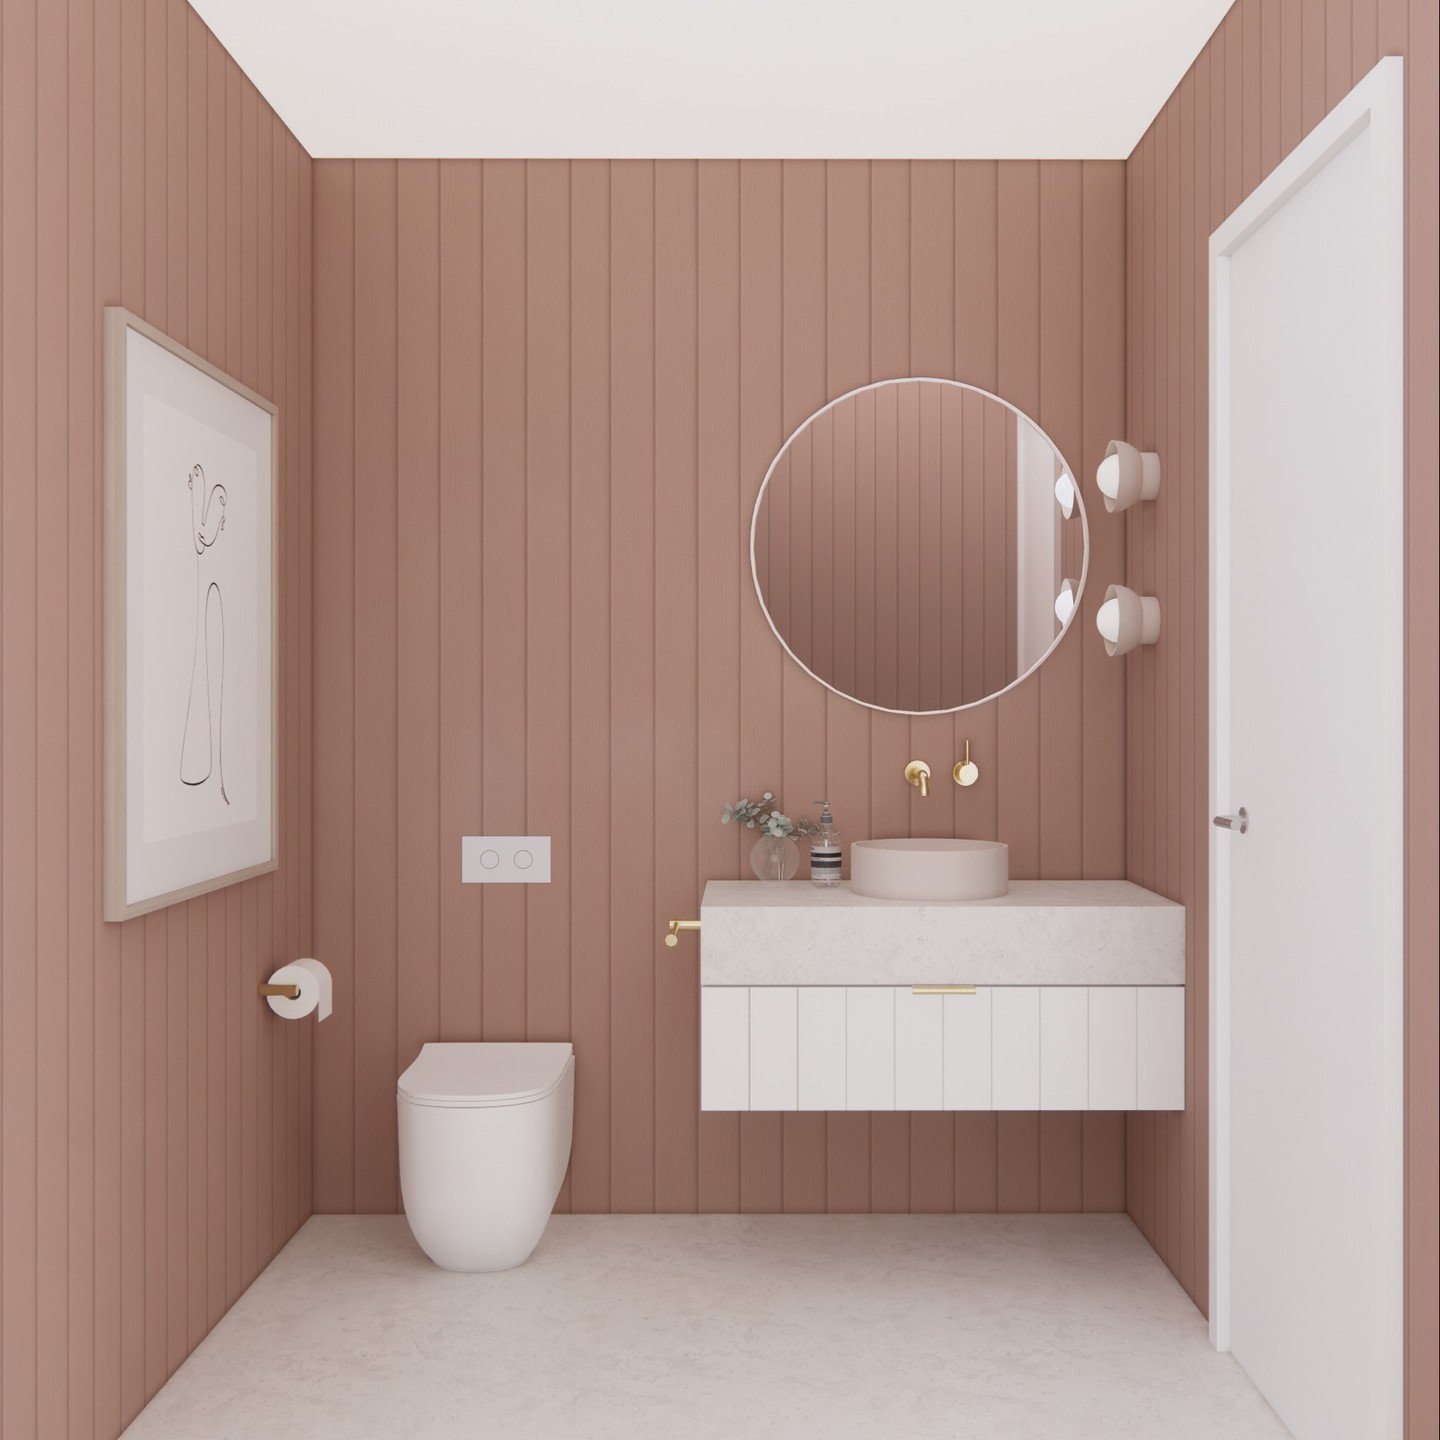 Planning mode. We've had a lot of fun with this powder room, selecting colour to add wow factor and keep the budget to a minimum. Beach side vibes for a beach suburb with V groove wall paneling rather than tiles, painted in a fun colour from @haymesp